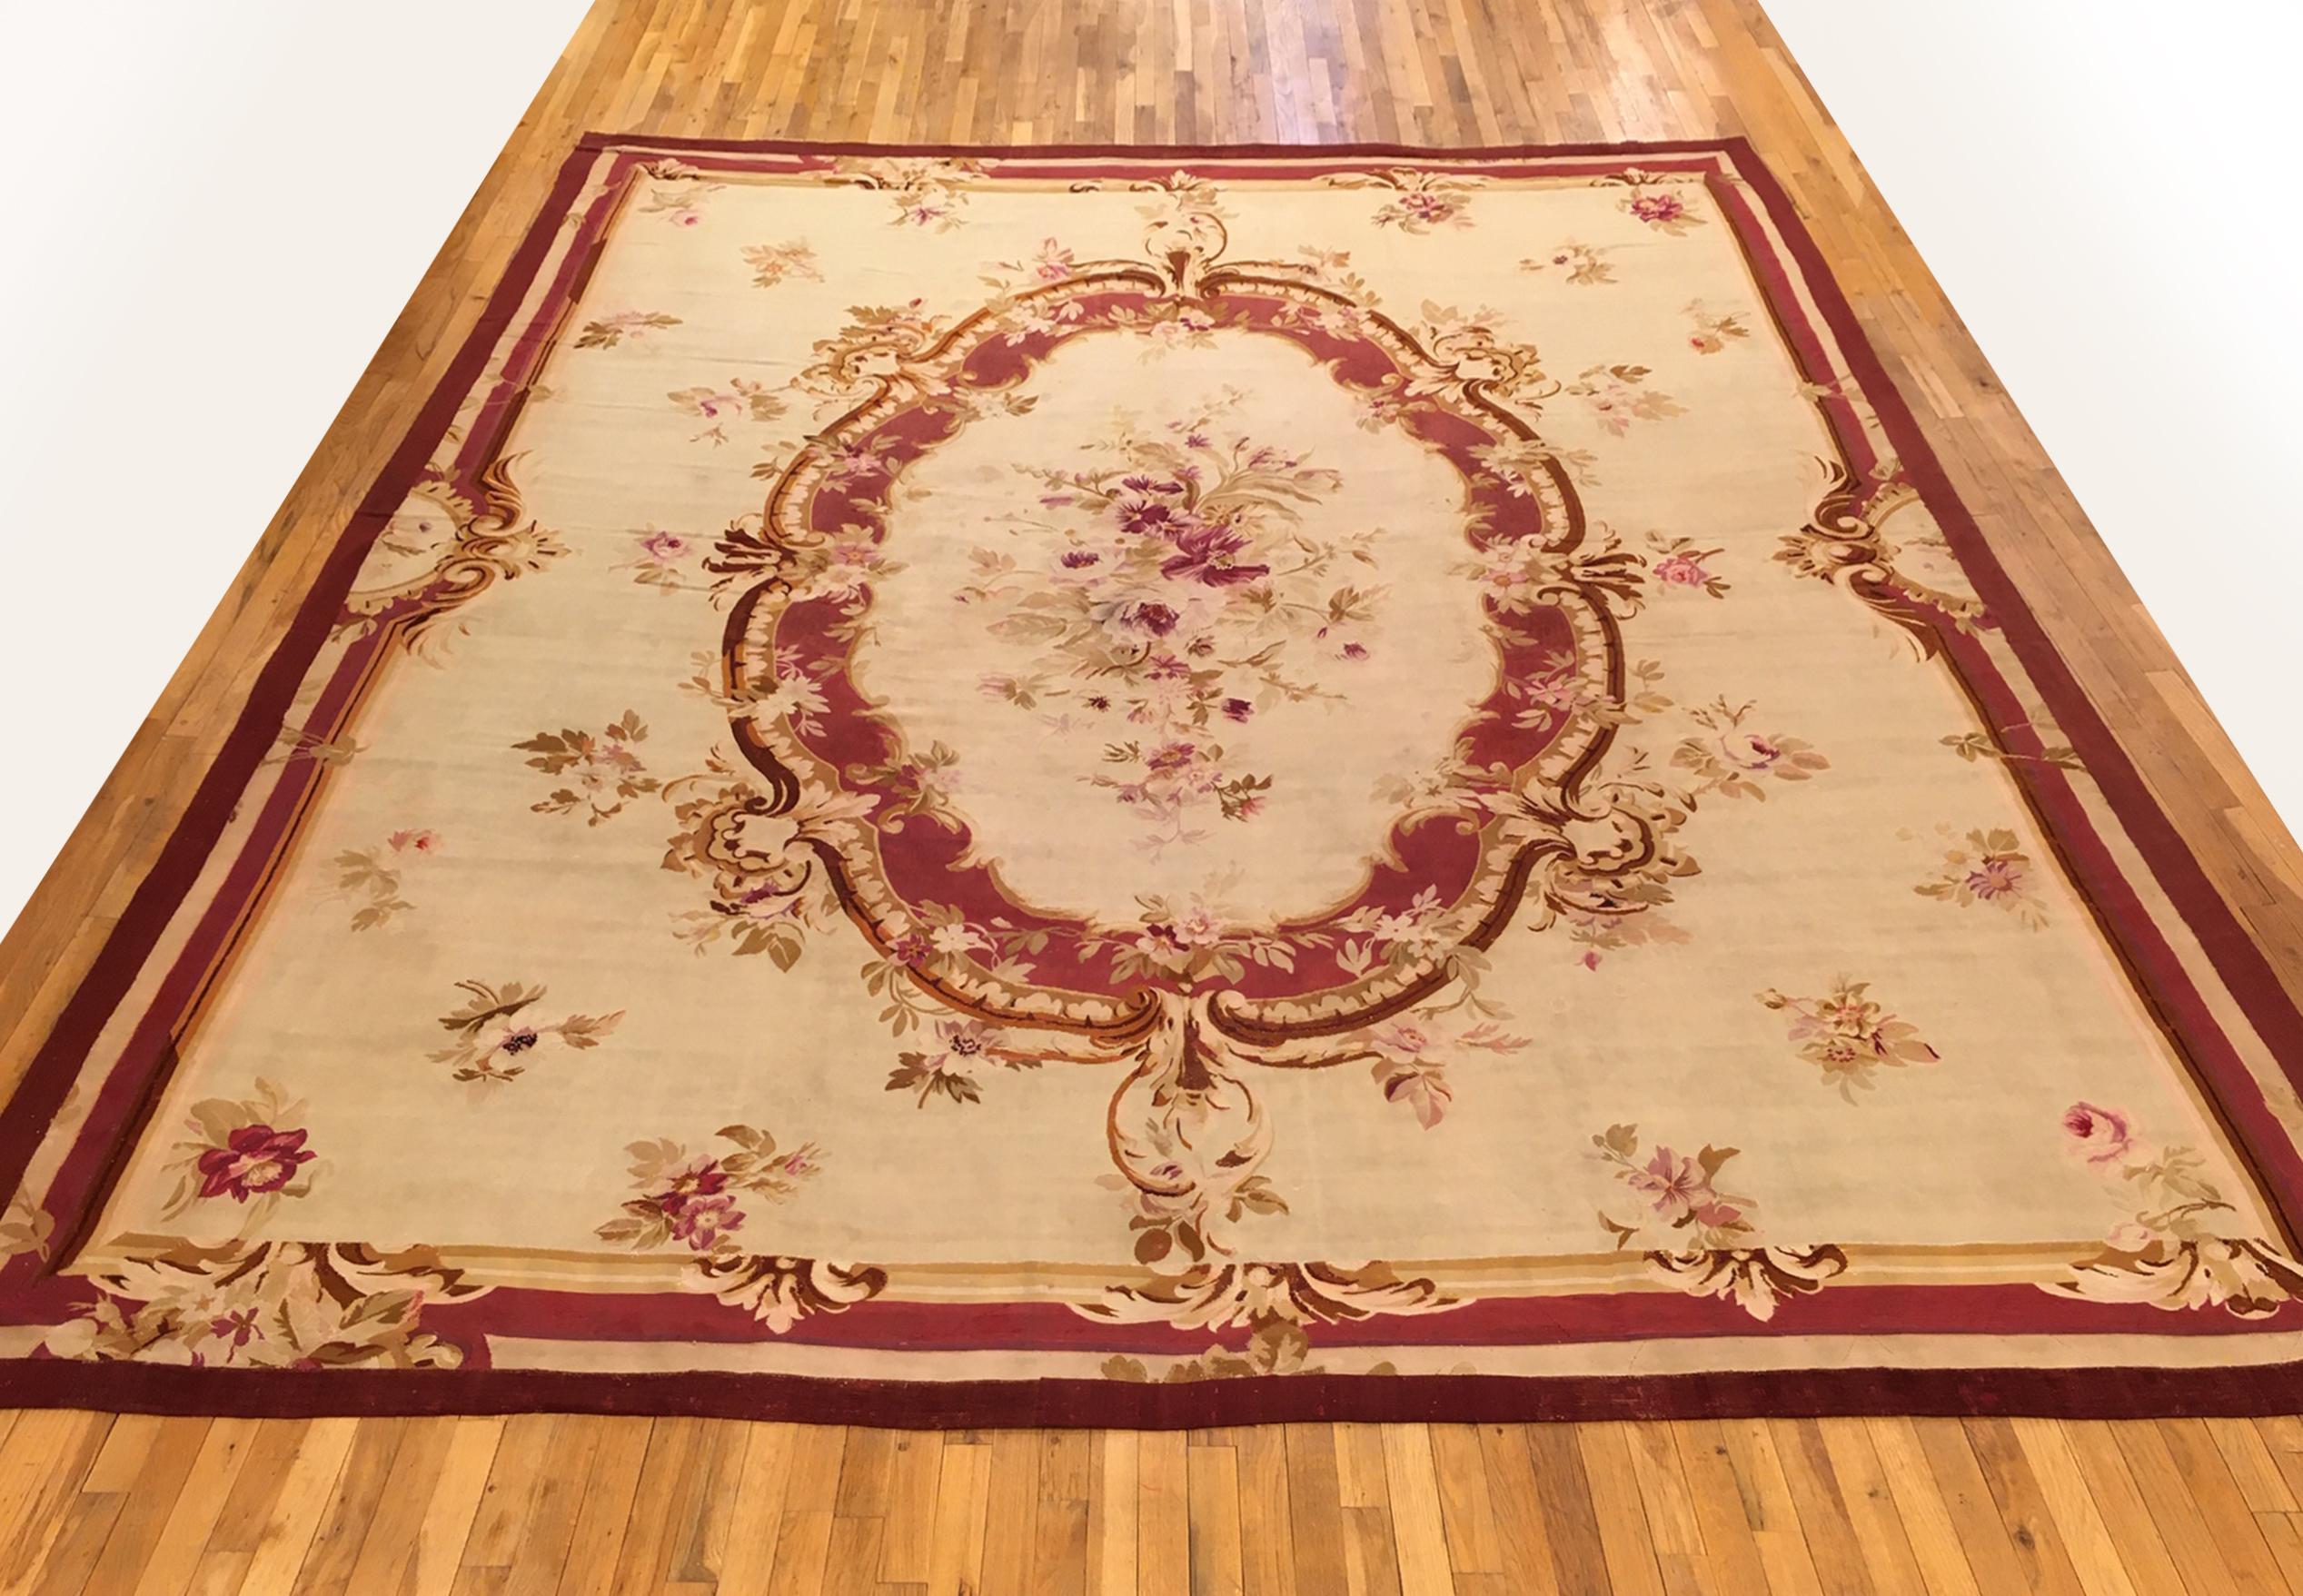 An antique French Aubusson carpet, size: 13'4 x 10'8, circa 1890. This fine Louis Philippe era flat-woven French wool carpet features a large and dynamic central medallion on a relatively sparse ivory field, with a primary border which reciprocate